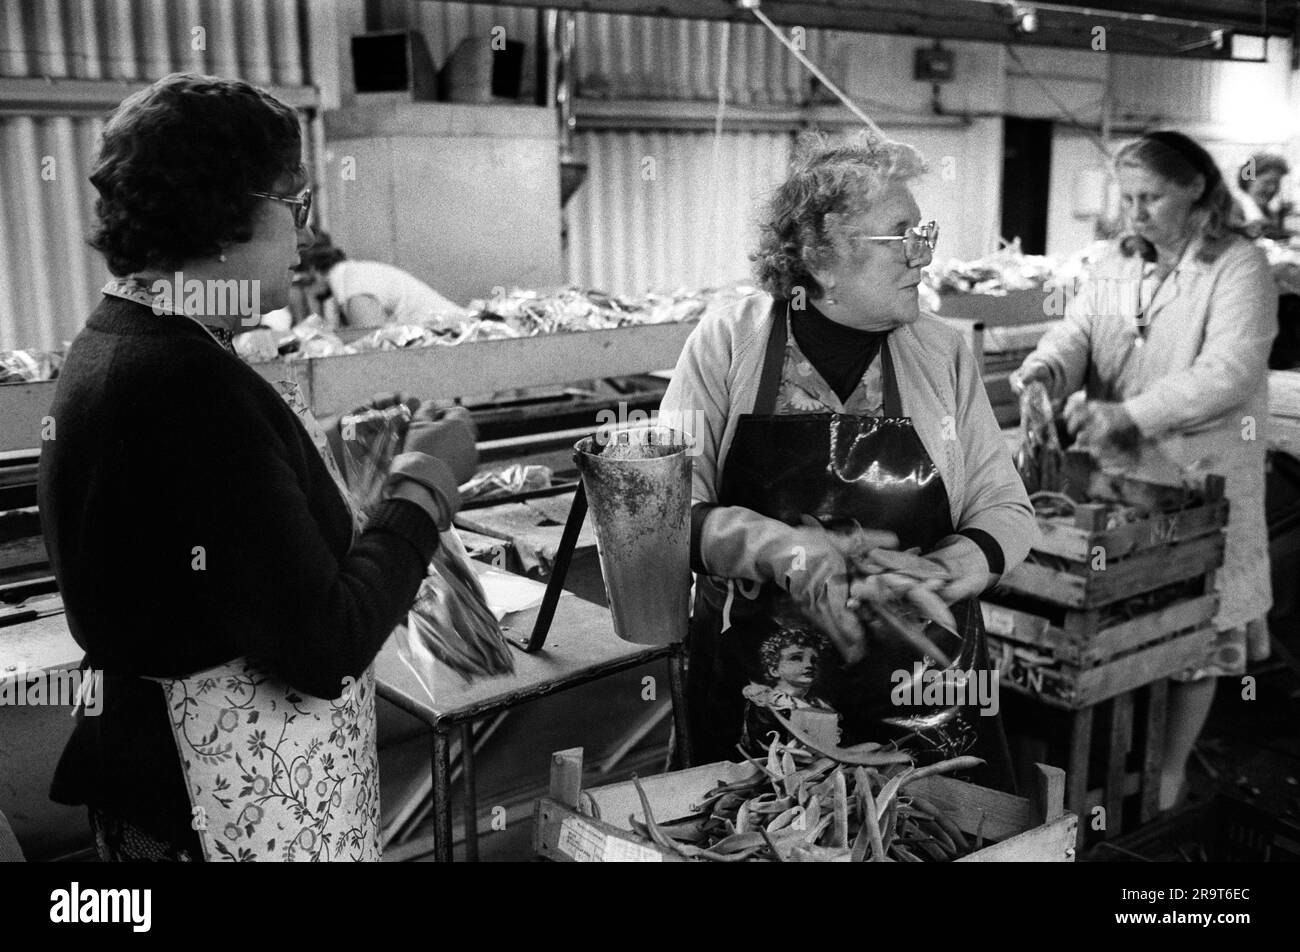 Casual seasonal farm work in packing and sorting facility. Local women  vegetable packing. Wisbech, Cambridgeshire, England circa 1977. 1970s UK HOMER SYKES Stock Photo